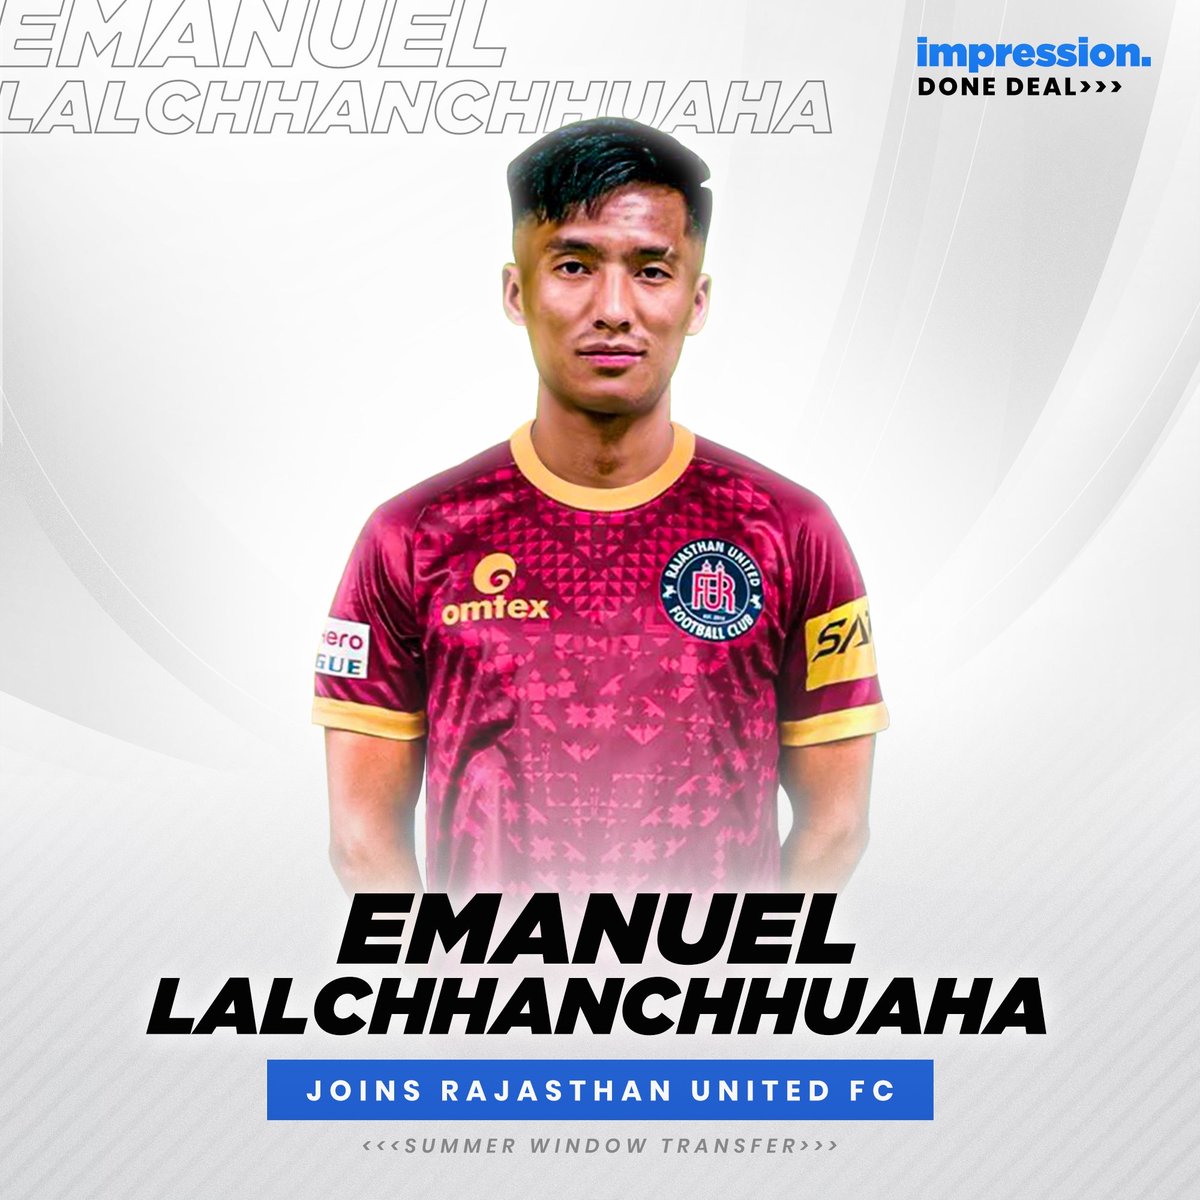 We are elated to announce that our athlete 𝐄𝐦𝐚𝐧𝐮𝐞𝐥 𝐋𝐚𝐥𝐜𝐡𝐡𝐚𝐧𝐜𝐡𝐡𝐮𝐚𝐡𝐚 has joined Rajasthan United FC on a two-year deal!📝😍

Wishing Emanuel all the luck ahead of his new challenge.

#ImpressionAthlete #IndianFootball  #TeamImpression #RUFC #FootballTransfer